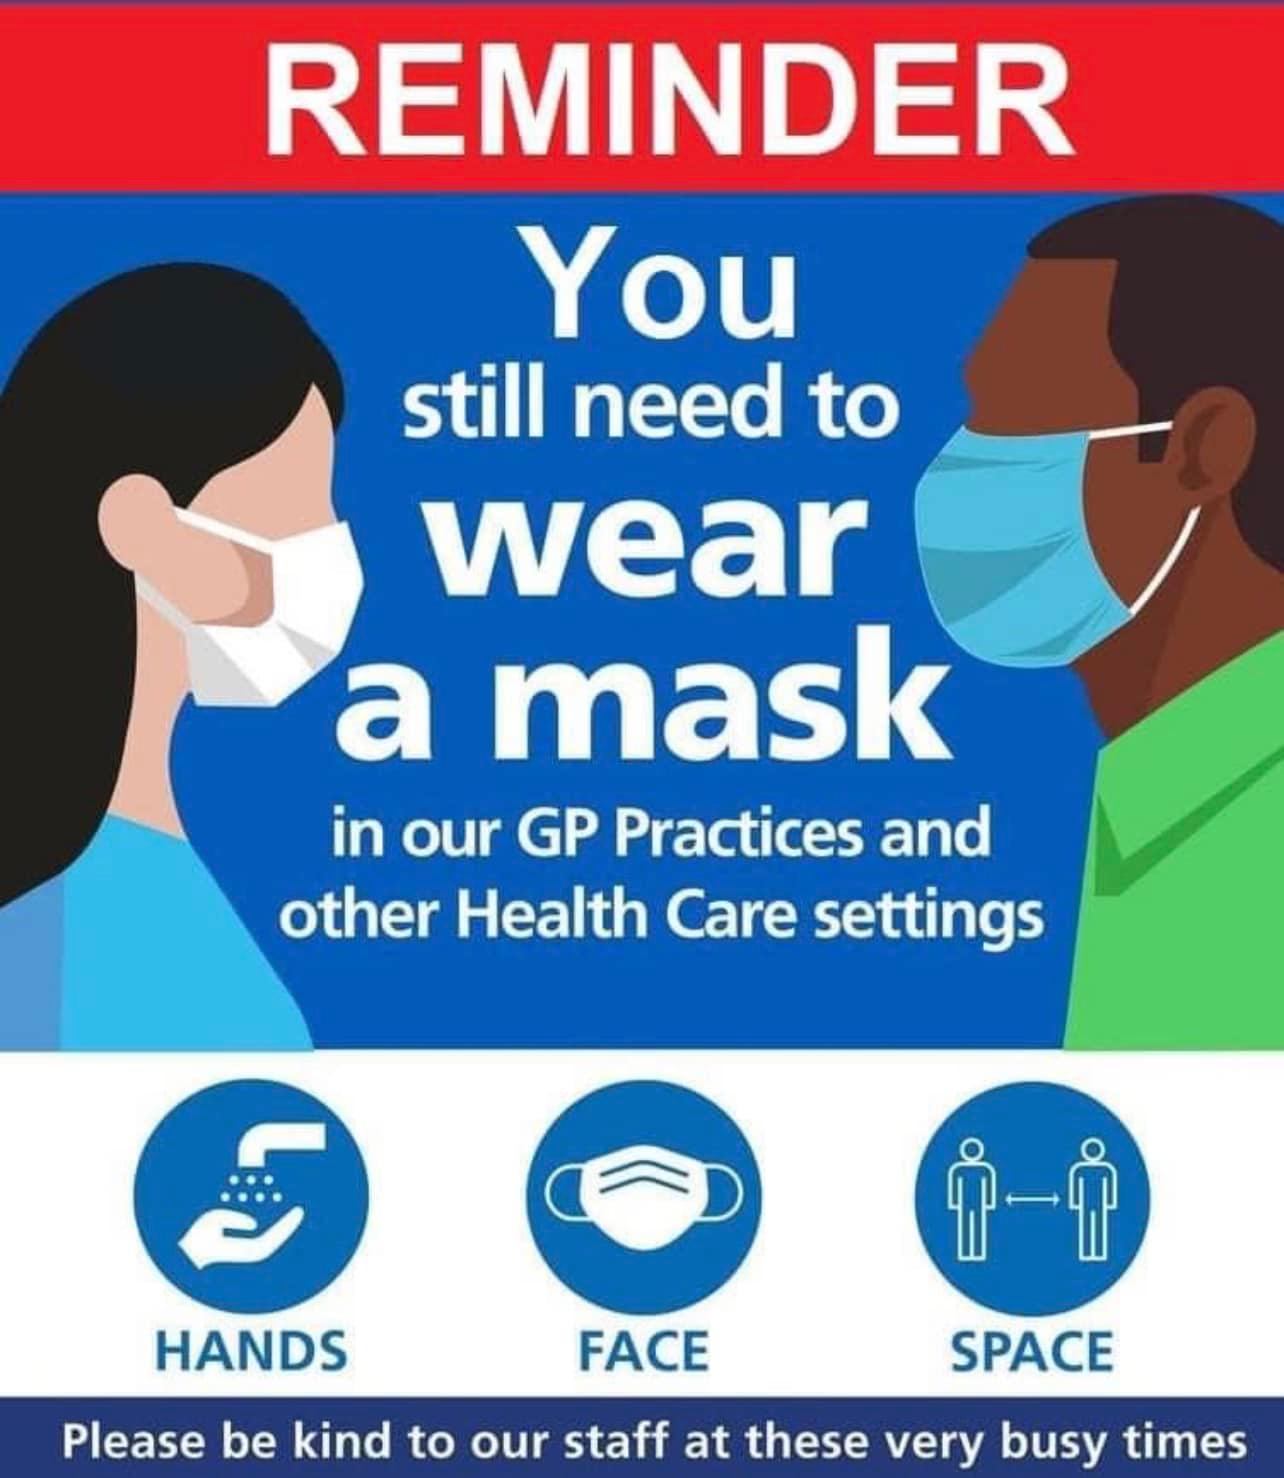 Infographic reminding patients to continue to wear a mask